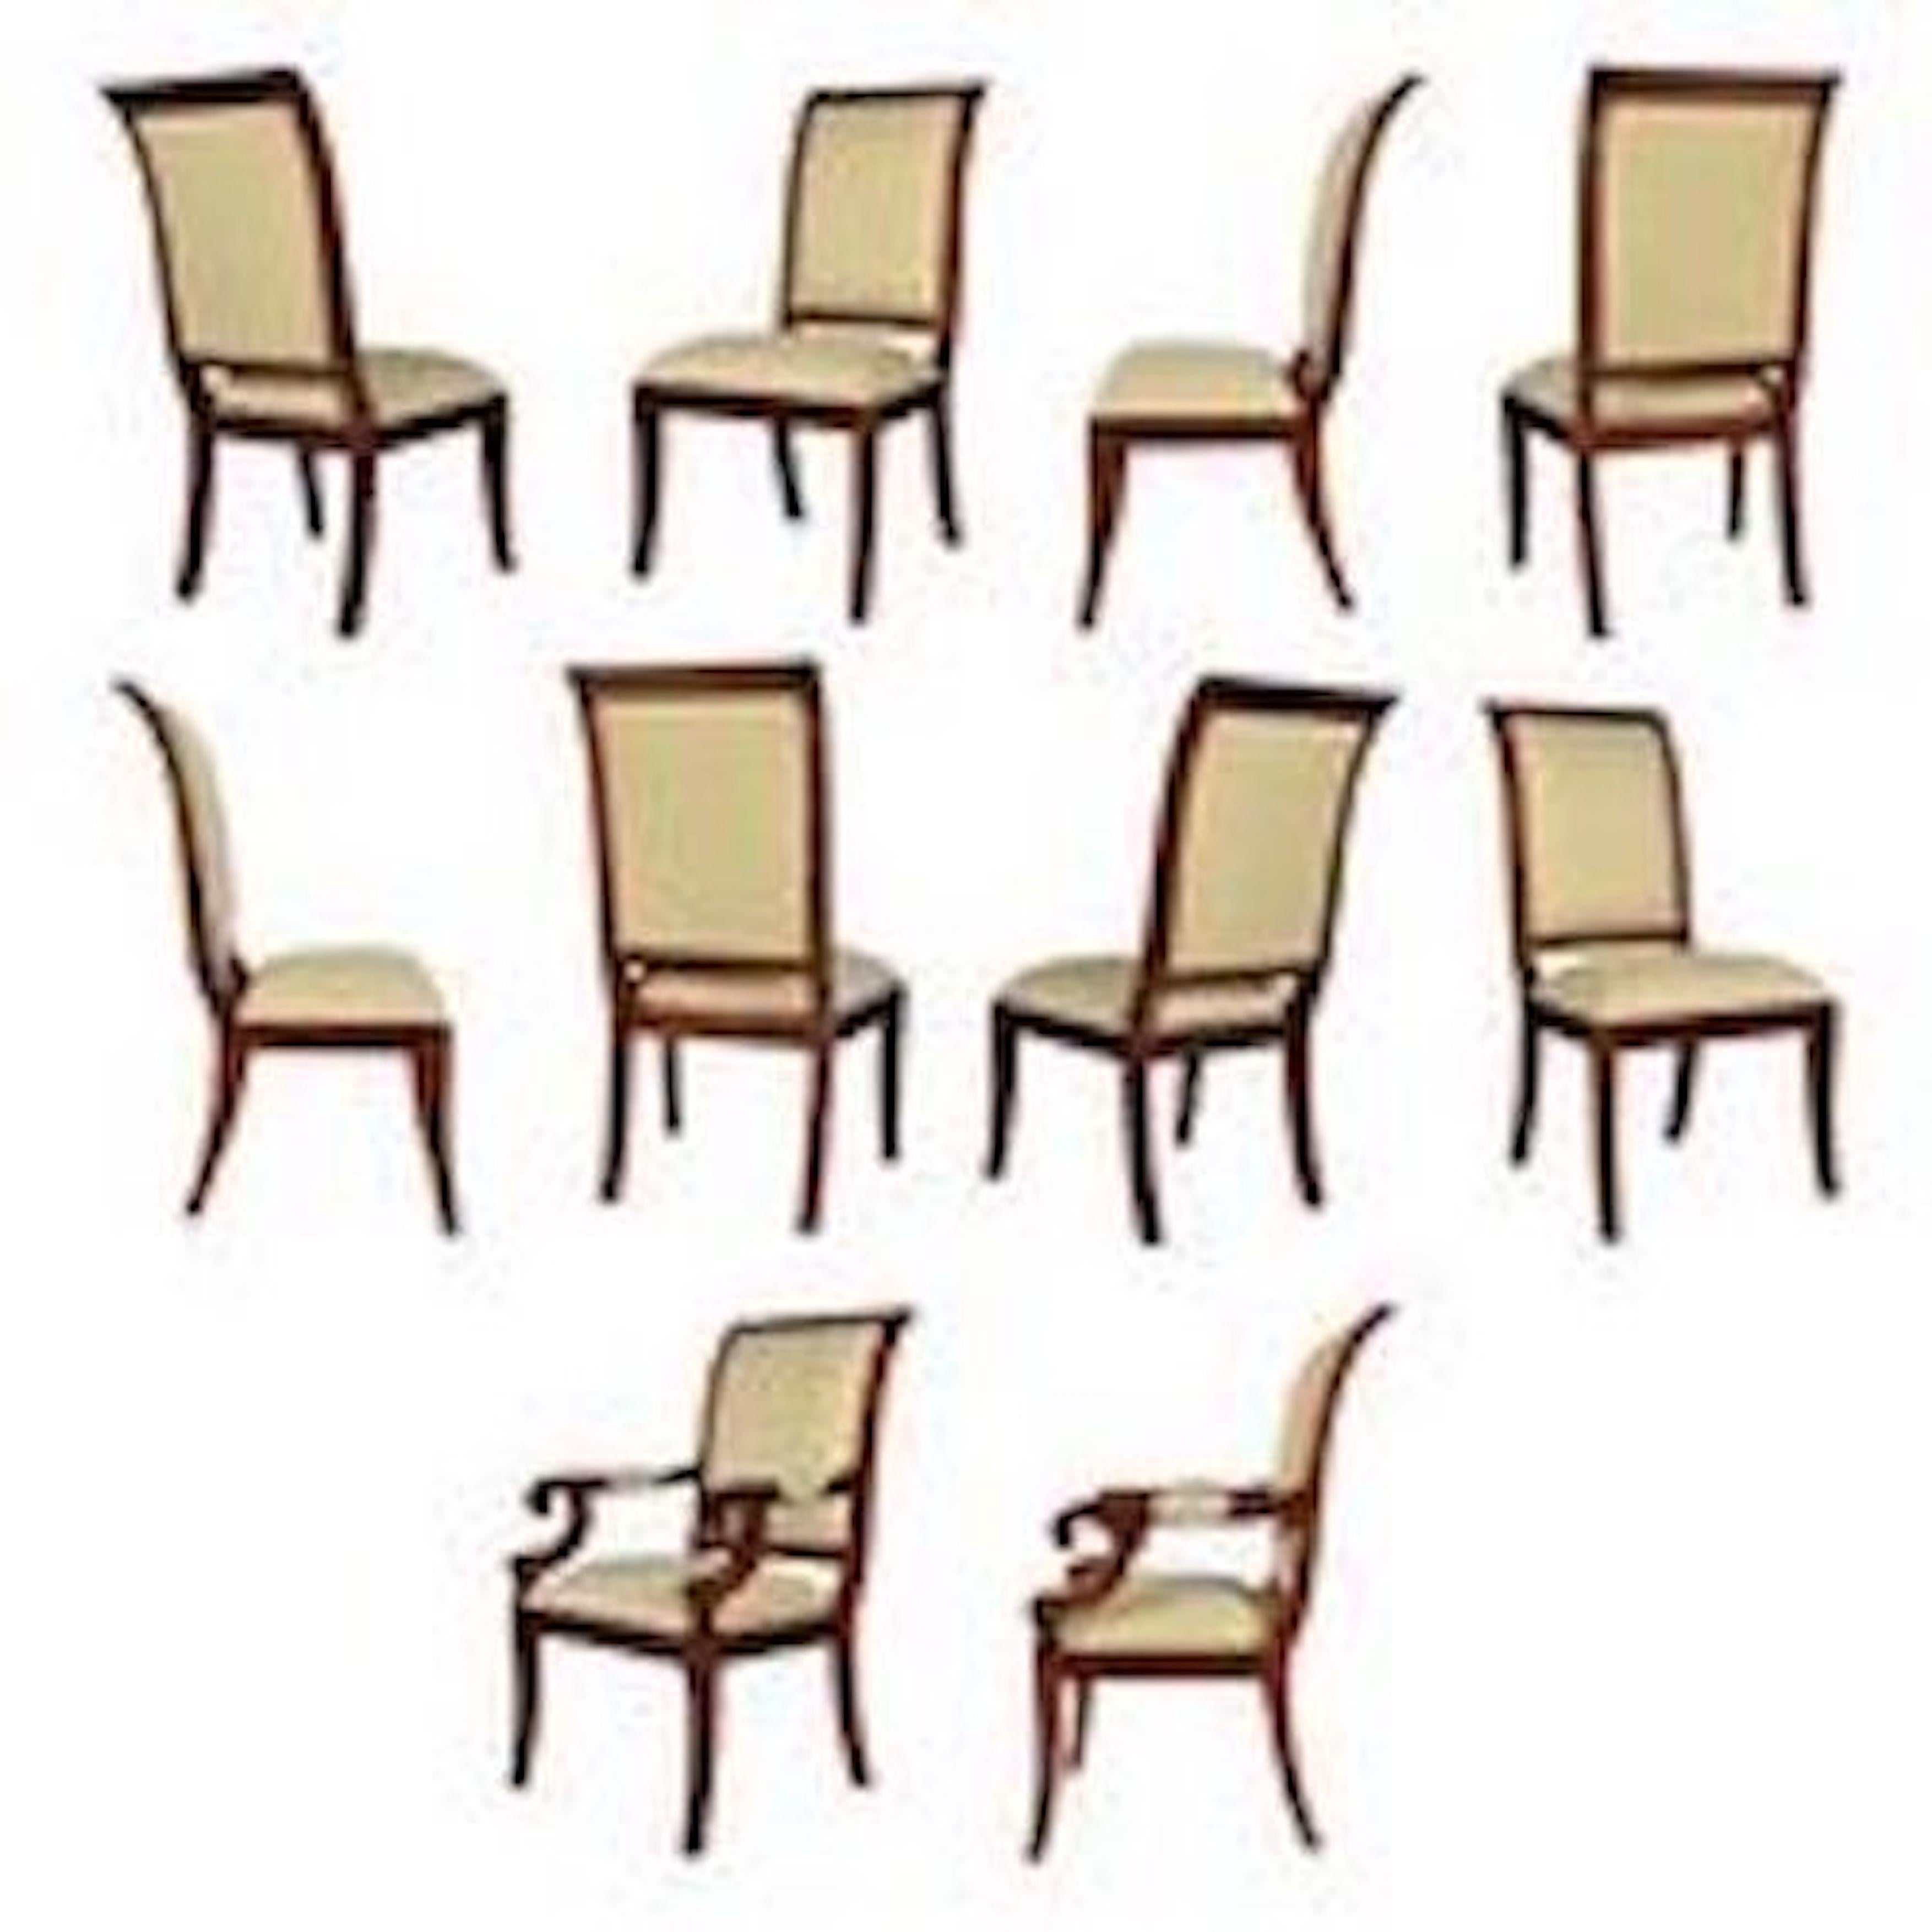 Regency Upholstered Dining Chairs, Set of 10